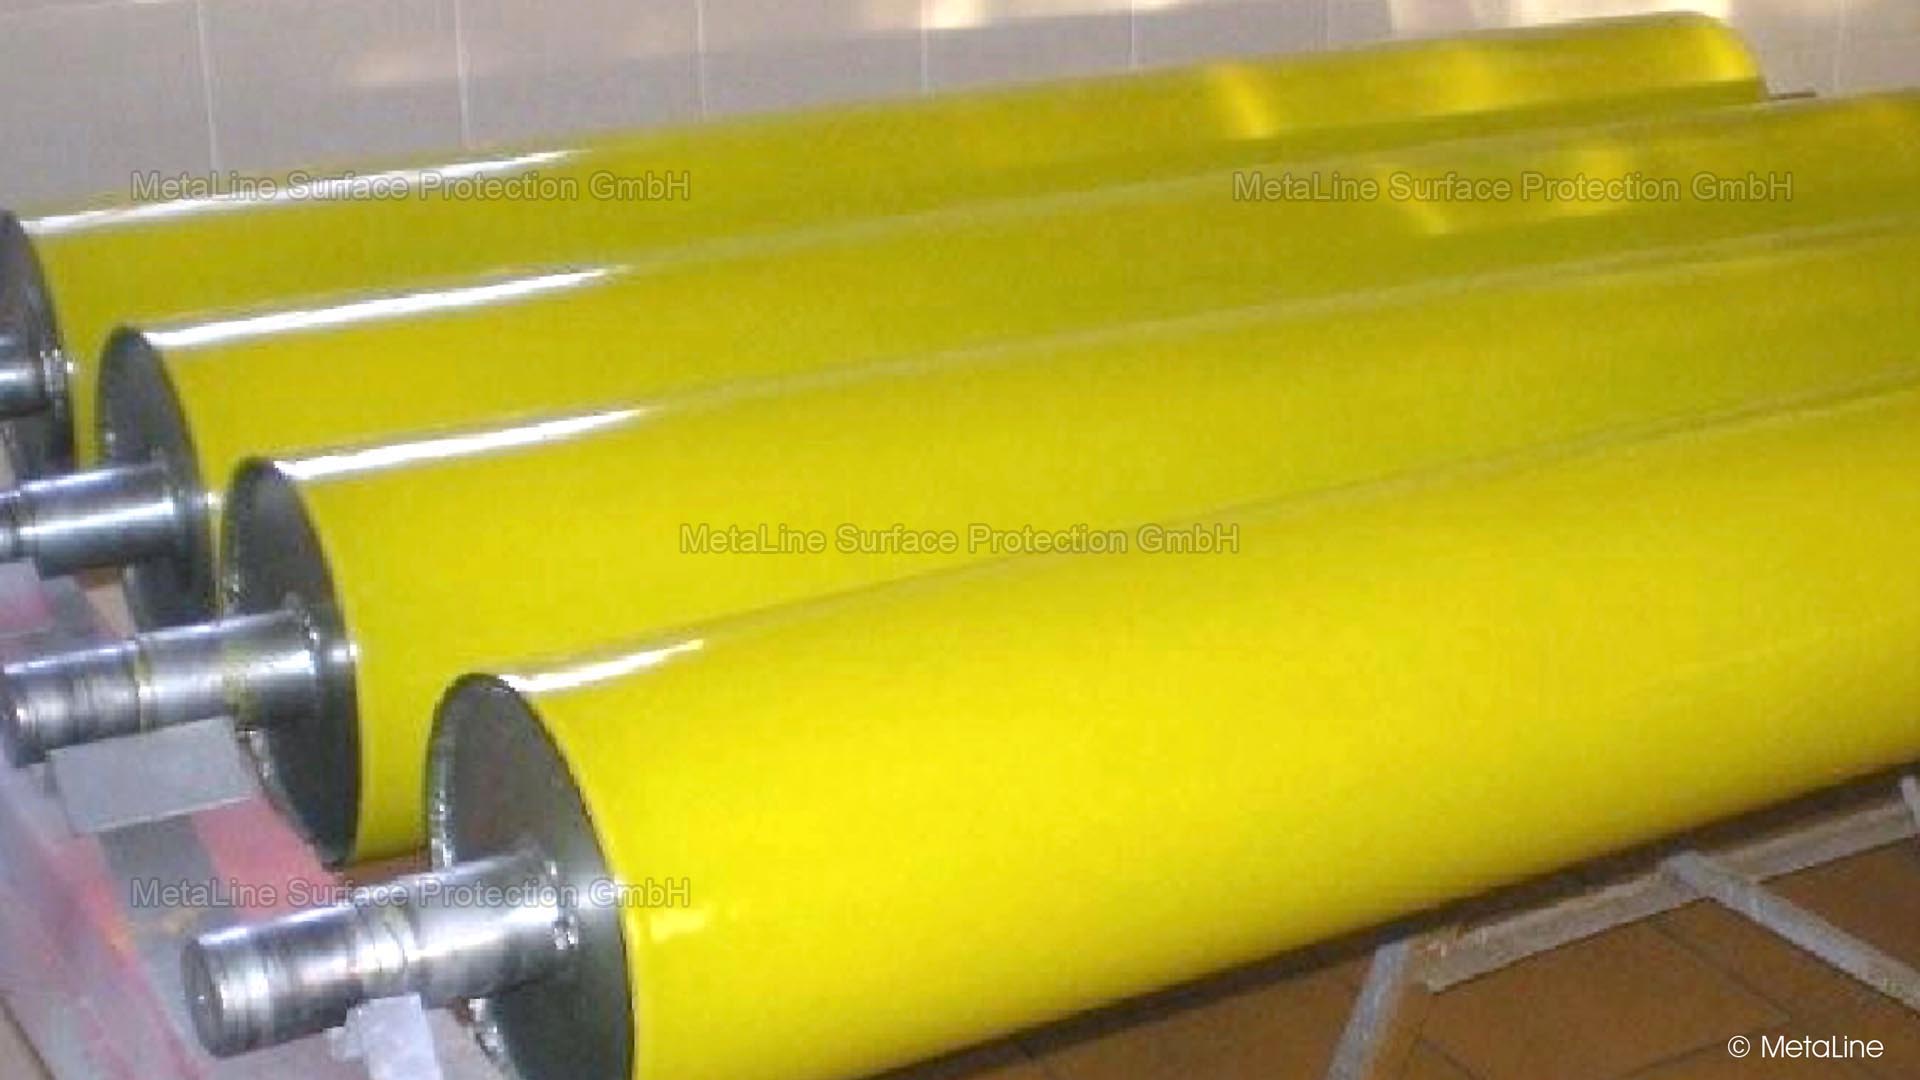 <!-- START: ConditionalContent --><!-- END: ConditionalContent -->   <!-- START: ConditionalContent --> Roller coating; Roller; Drum; Coating; Paper; Repair; Printing; Anti-adhesion, Repair, Coating; Paper <!-- END: ConditionalContent -->   <!-- START: ConditionalContent --><!-- END: ConditionalContent -->   <!-- START: ConditionalContent --><!-- END: ConditionalContent -->